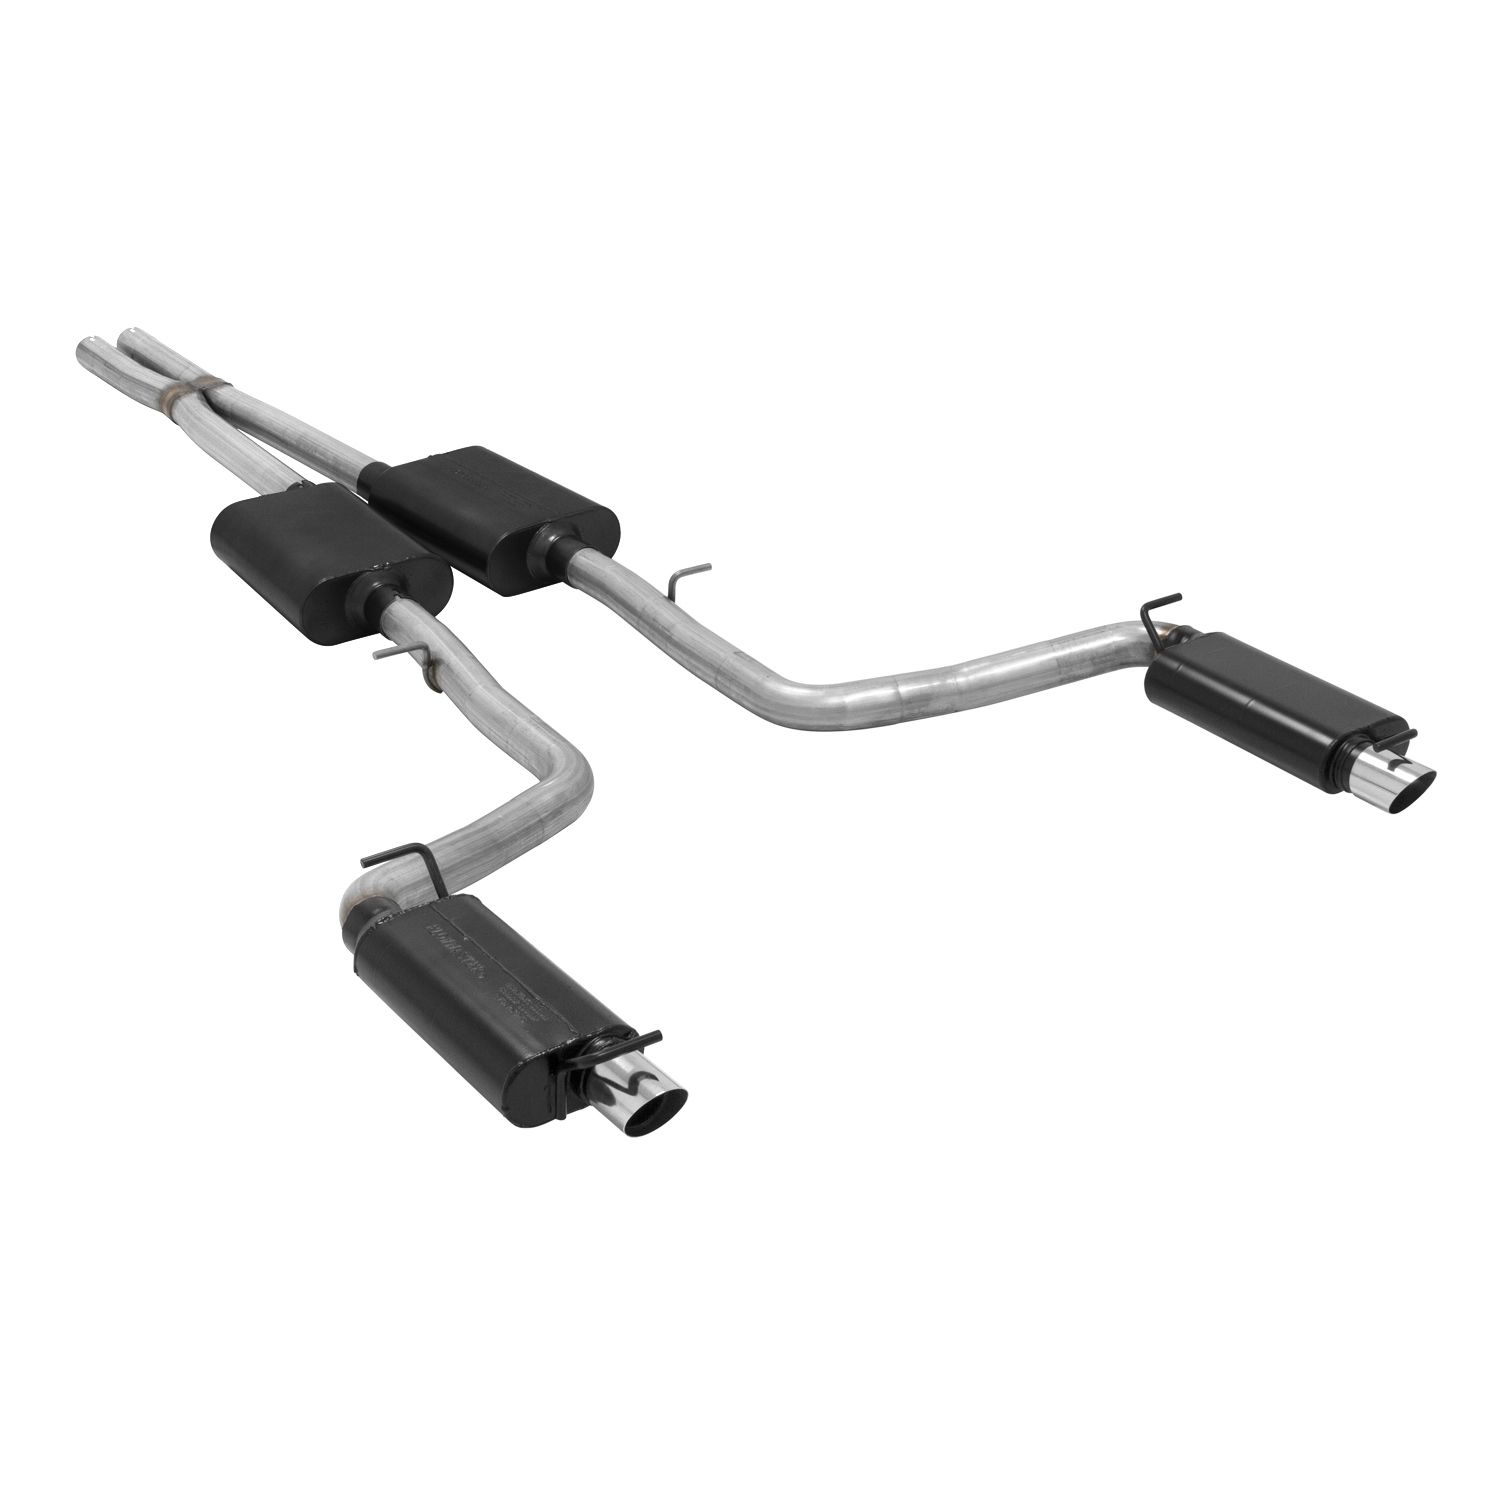 2015-2016 Dodge Charger Pursuit/R/T/T Road & Track 5.7L Flowmaster Force II Cat-Back Exhaust